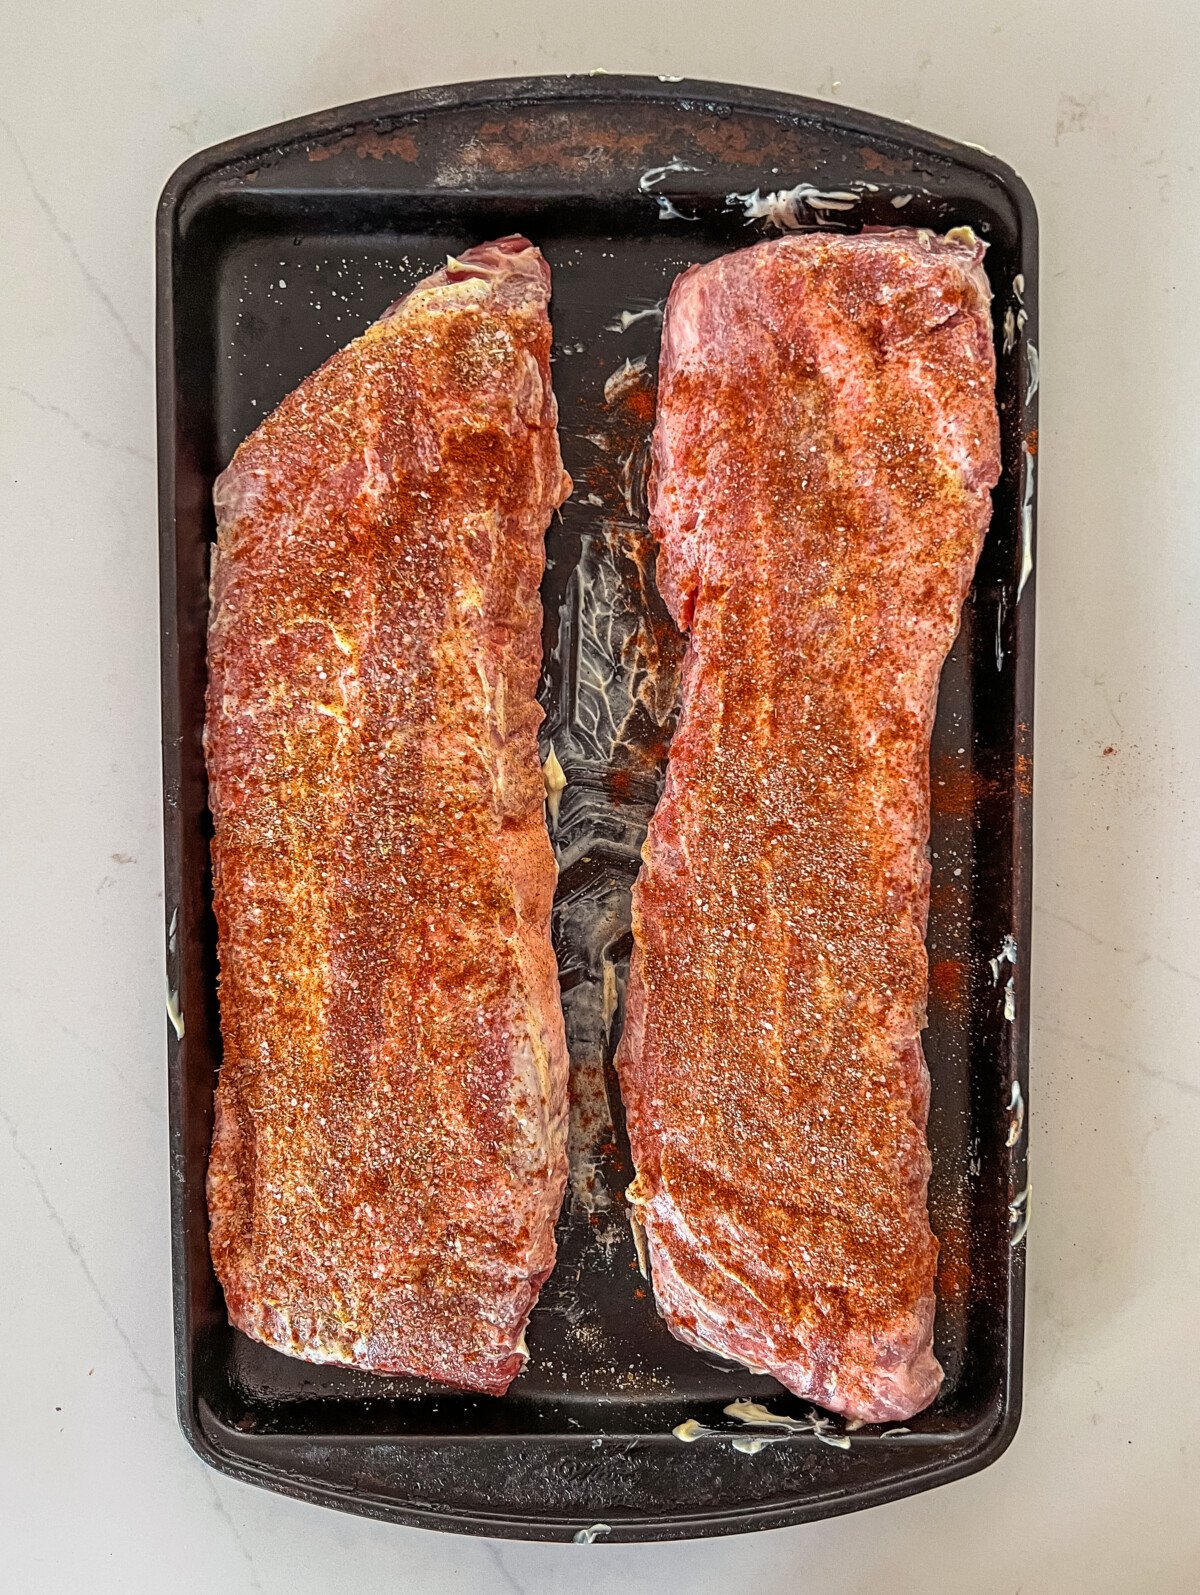 2 racks of baby back ribs rubbed with mayo and seasoned with spices.